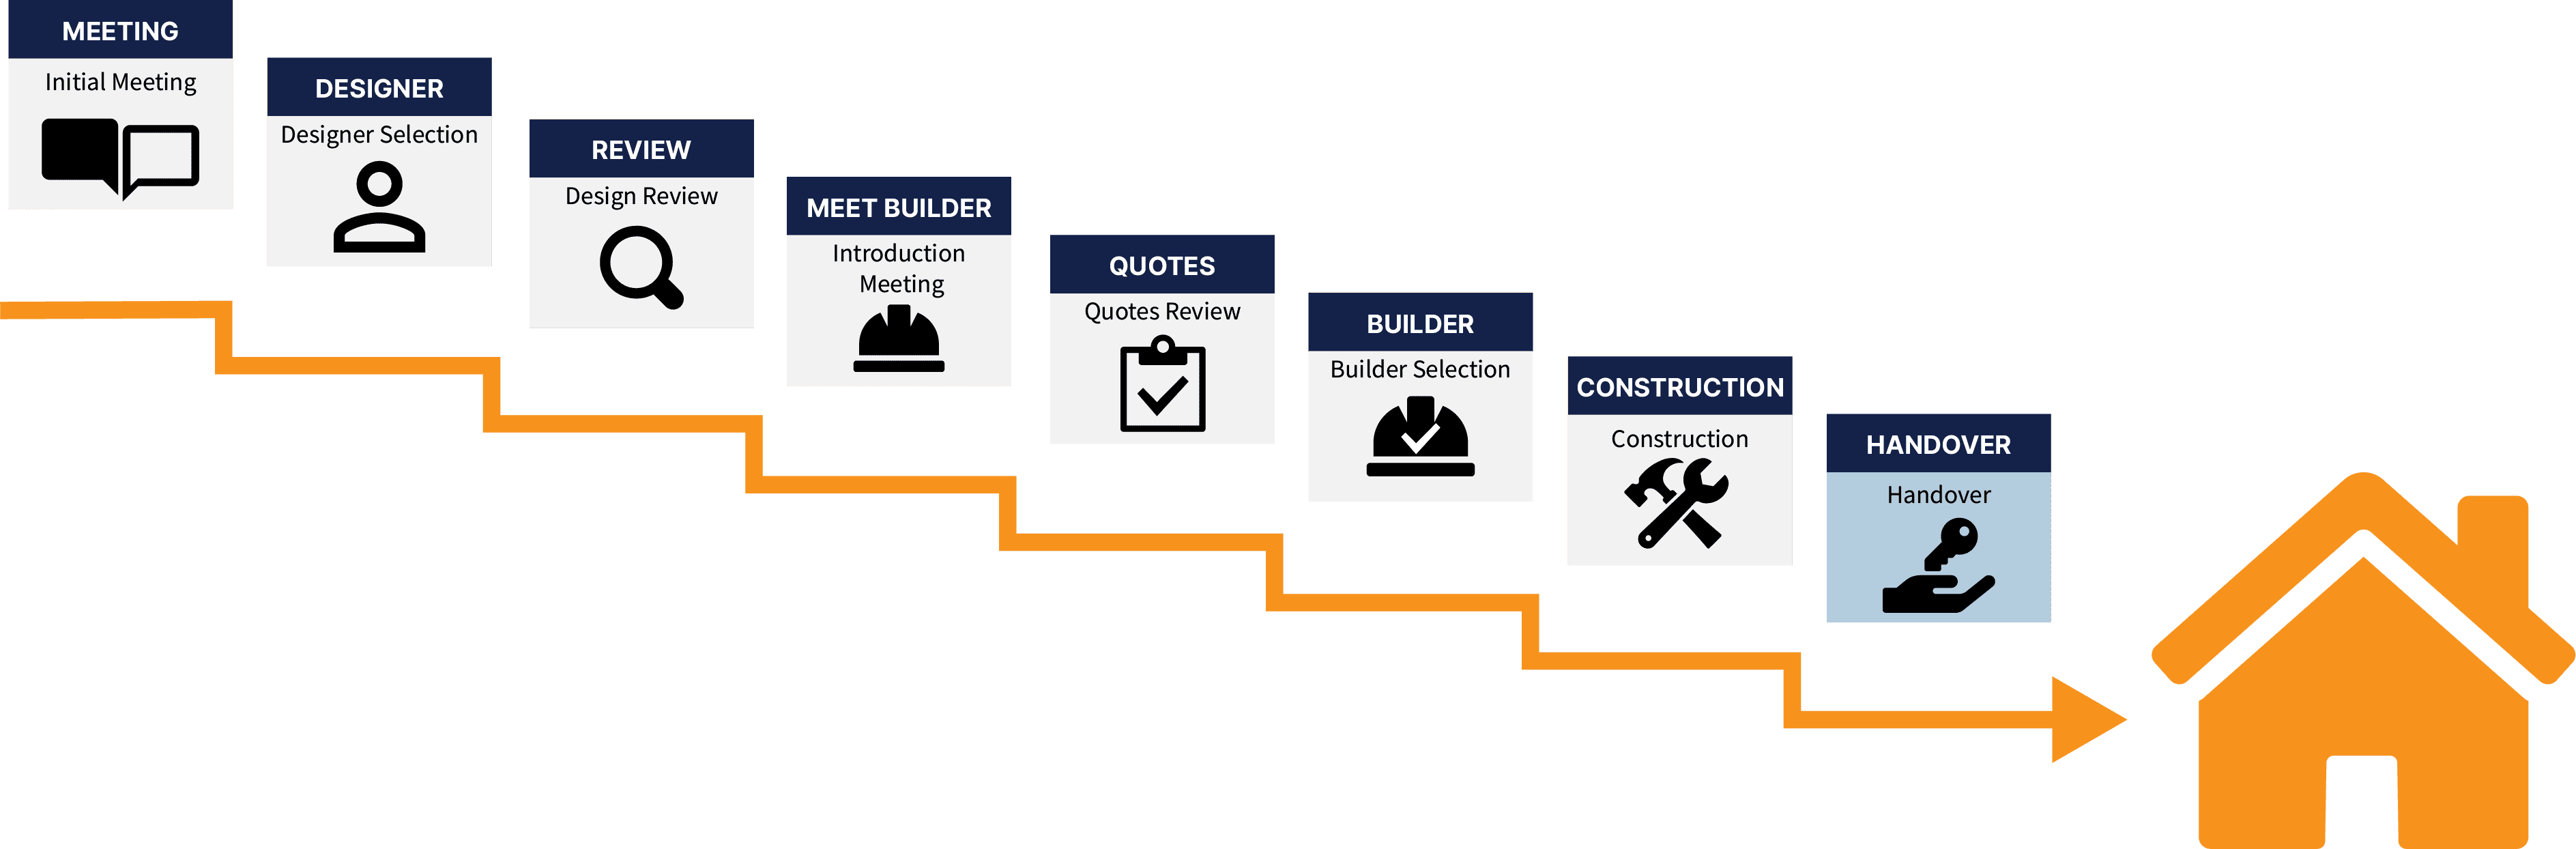 A roadmap of the home construction/renovation project. From meeting with Builder Finders broker to designer selection to design review to builder introduction to construction quotes review to builder selection to construction to handover.